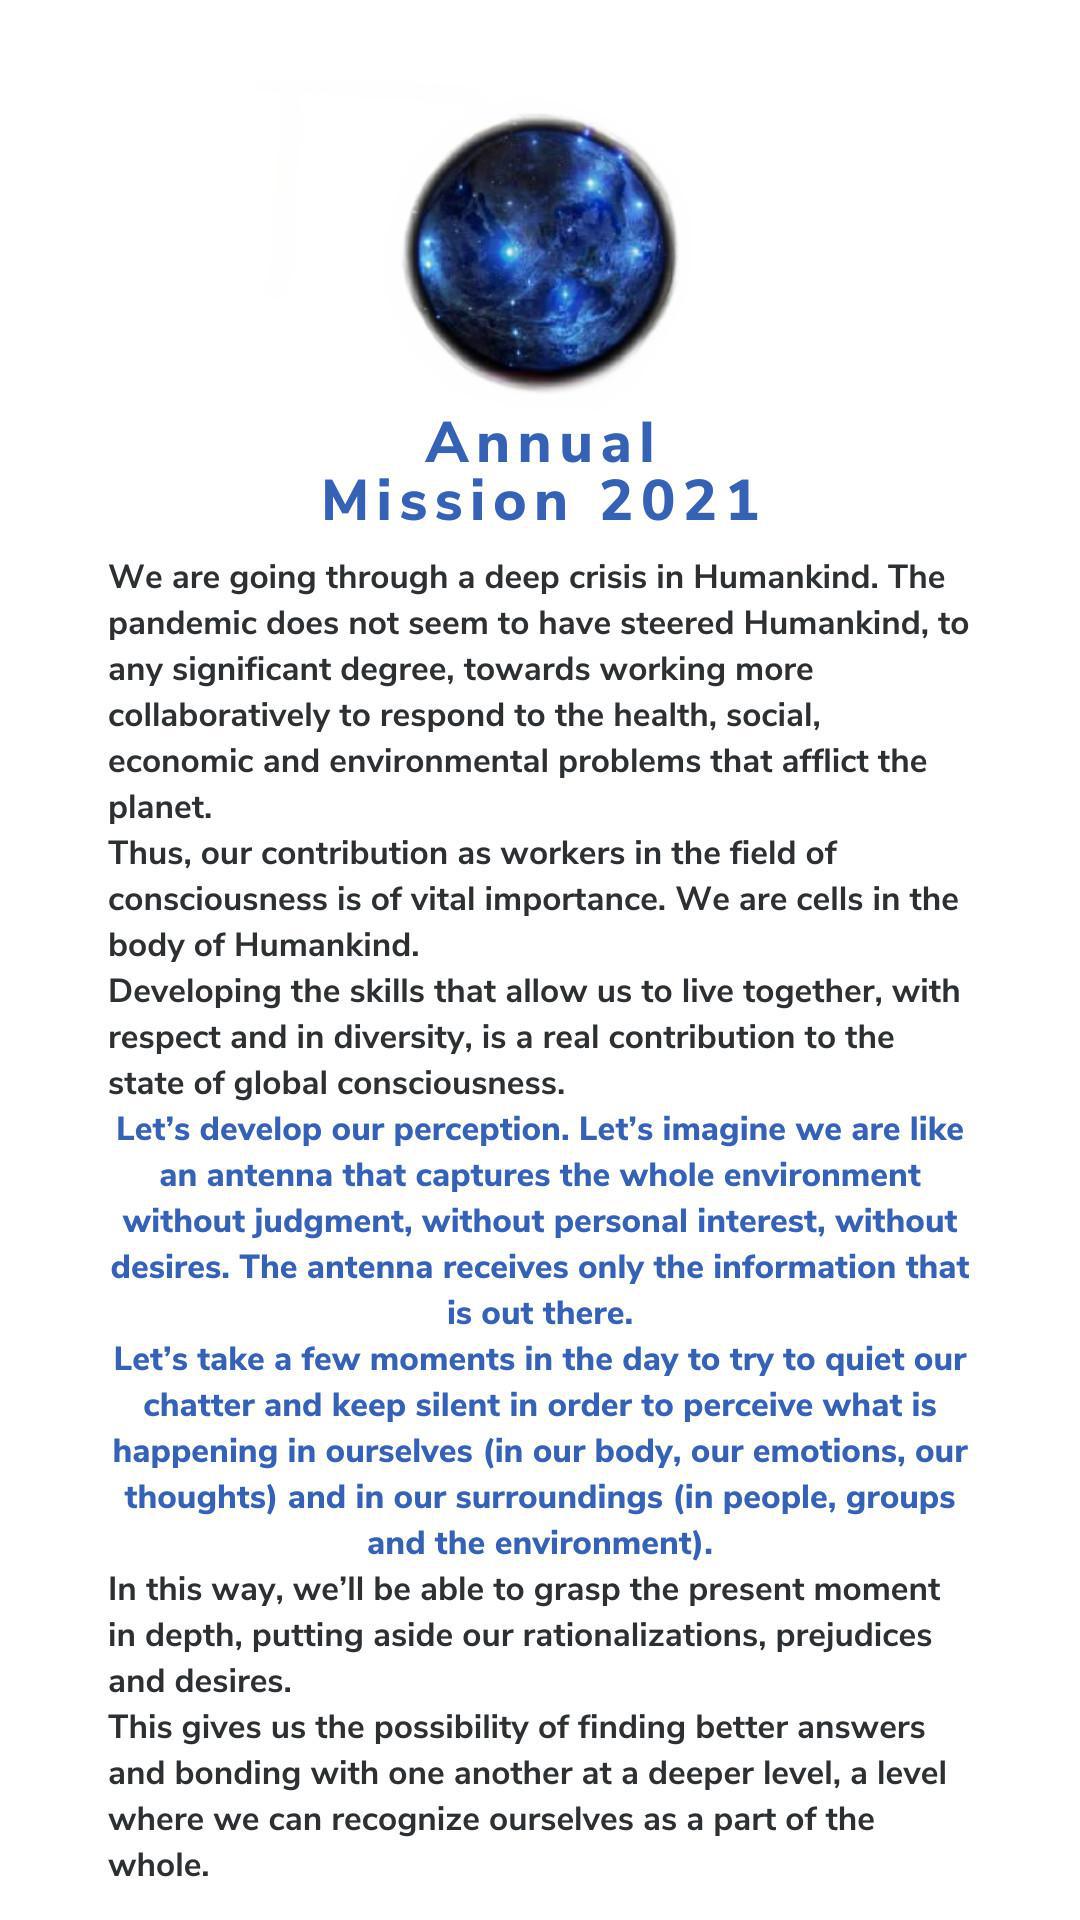 Annual Mission 2021